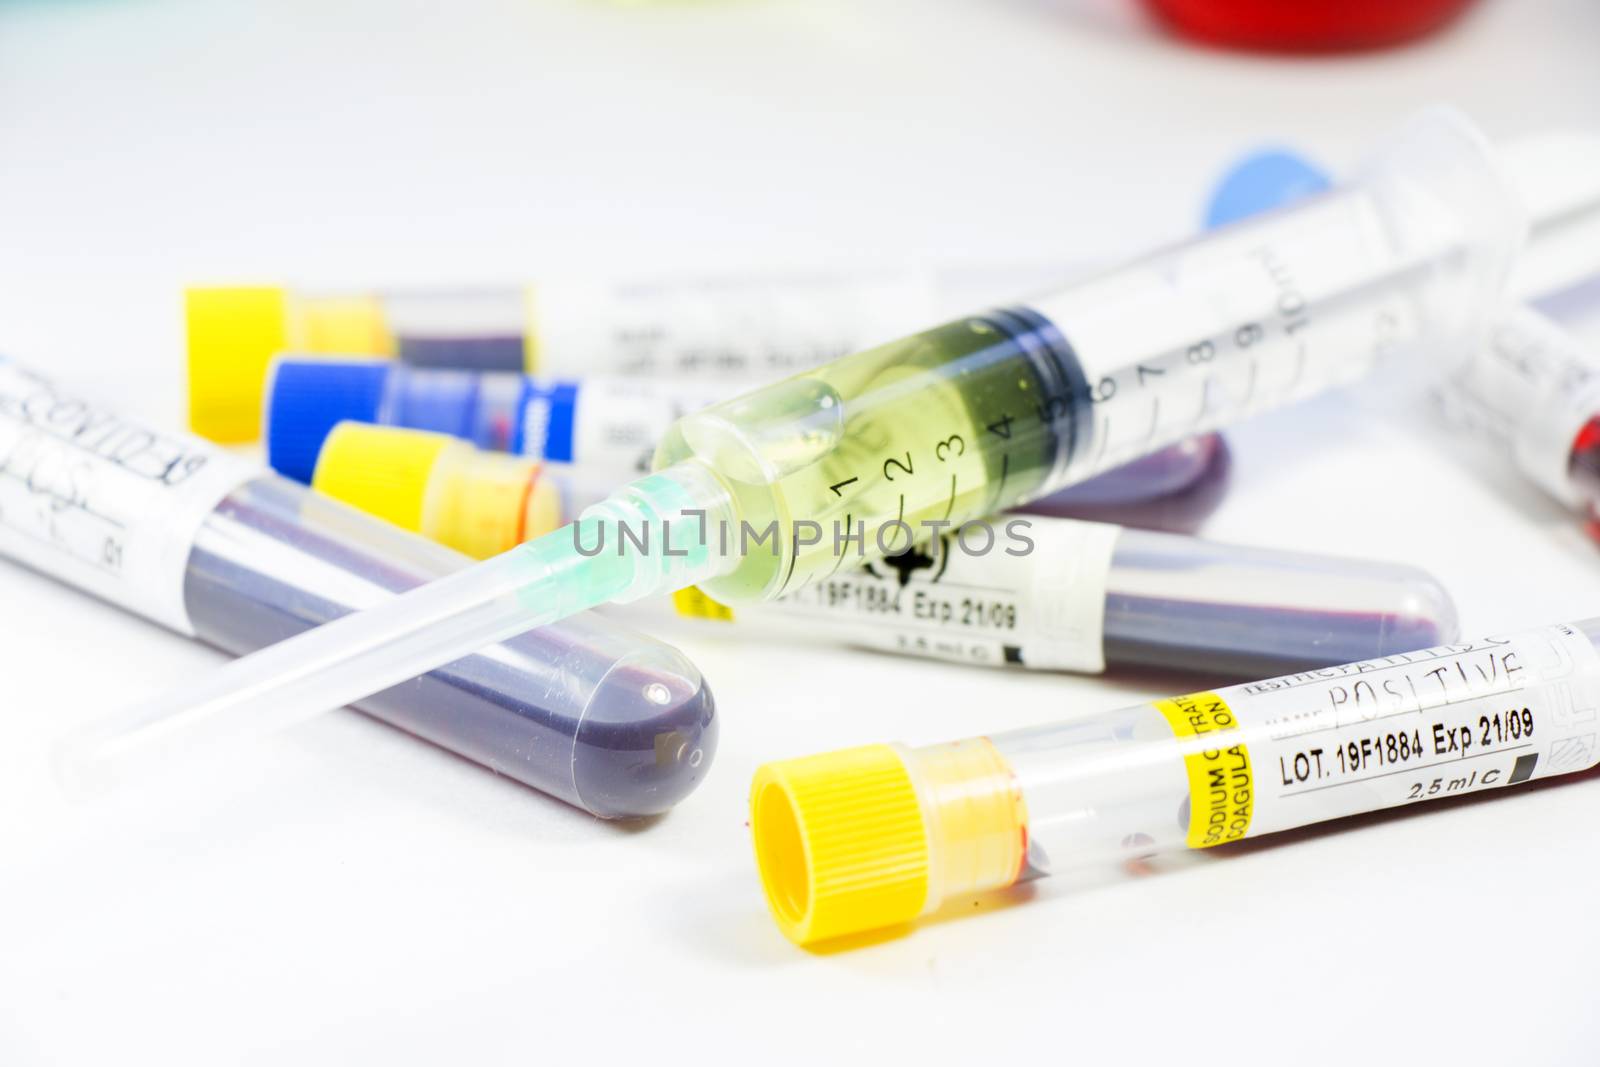 Corona virus and Covid-19 positive blood test tubes on the white background. Diagnosis and laboratory. Medical needle and blood tube, corona virus or covid-19 vaccine. Close-up and studio shoot.